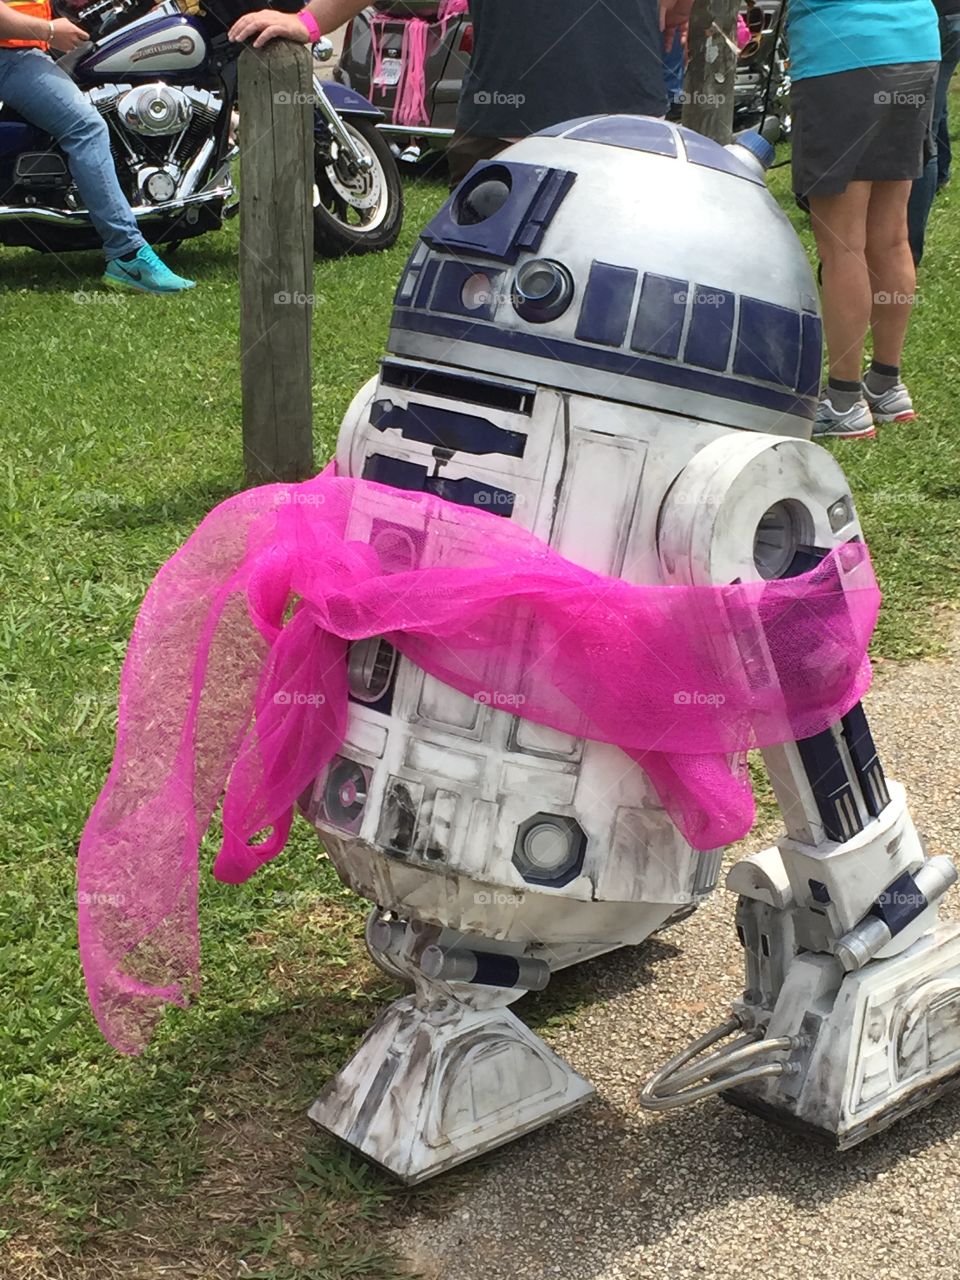 R2D2 supporting Avon 39 walk to end breast cancer!